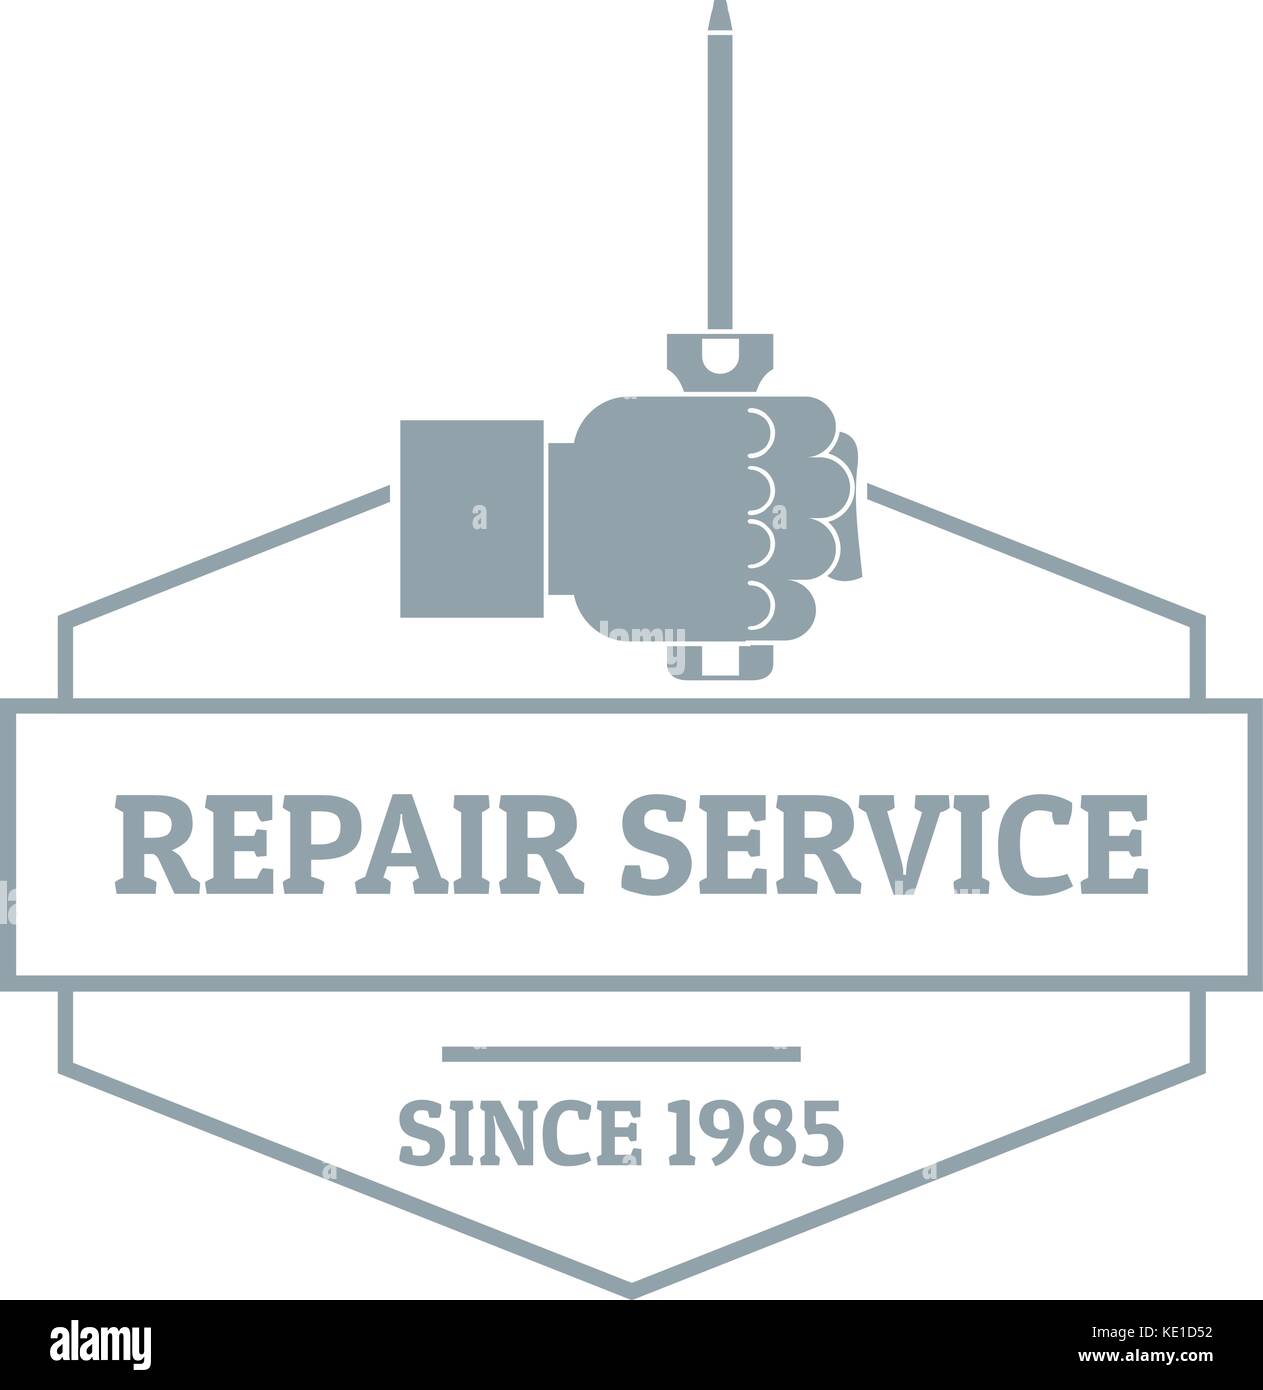 Working service logo, vintage style Stock Vector